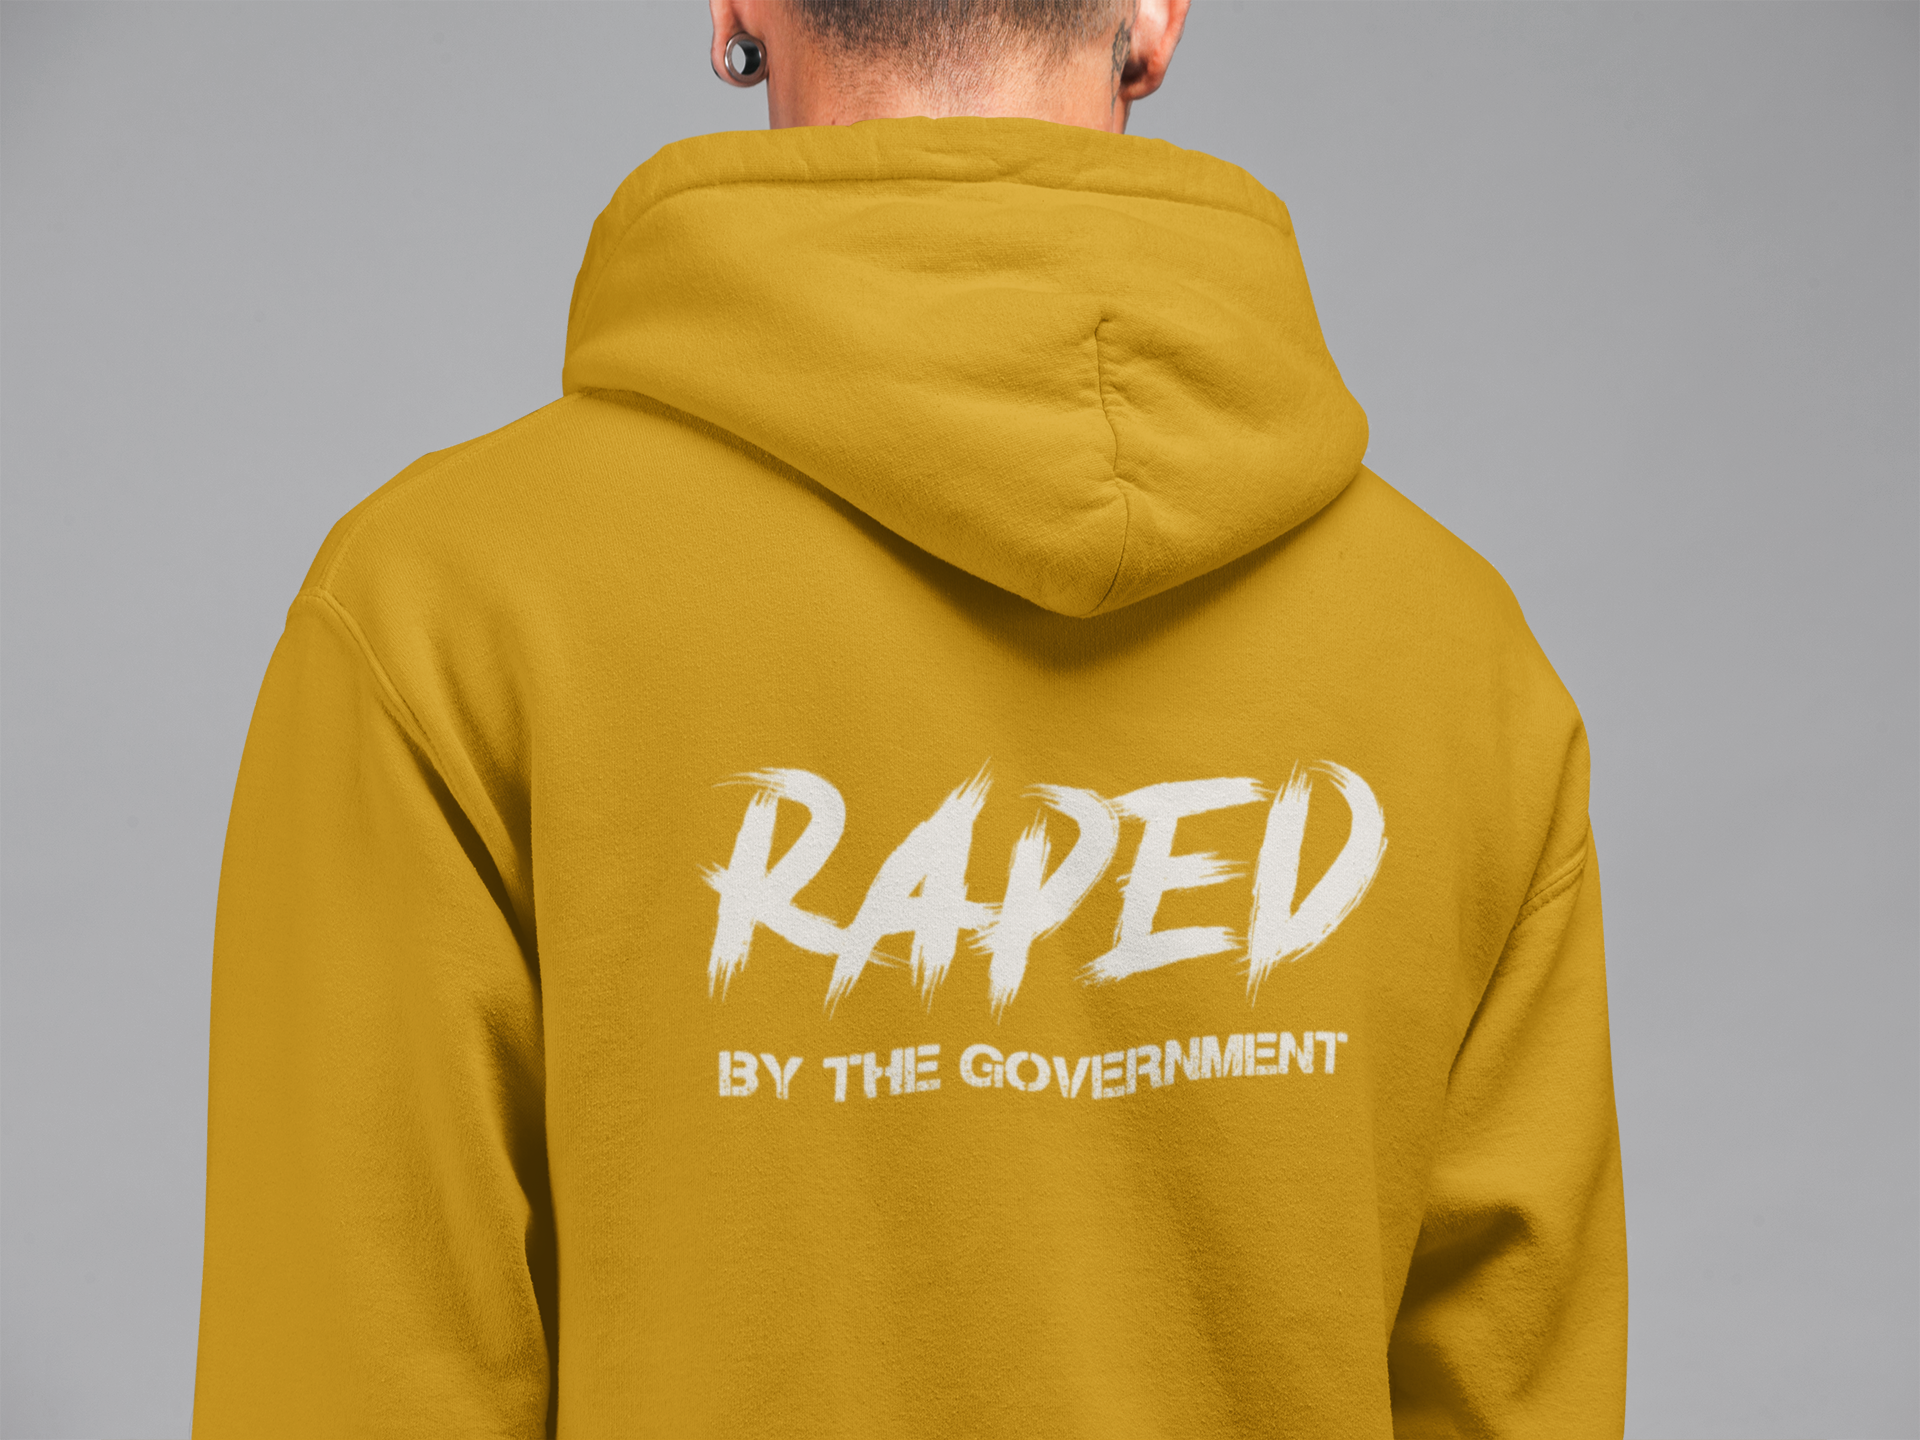 Raped By The Government Hoodie Men